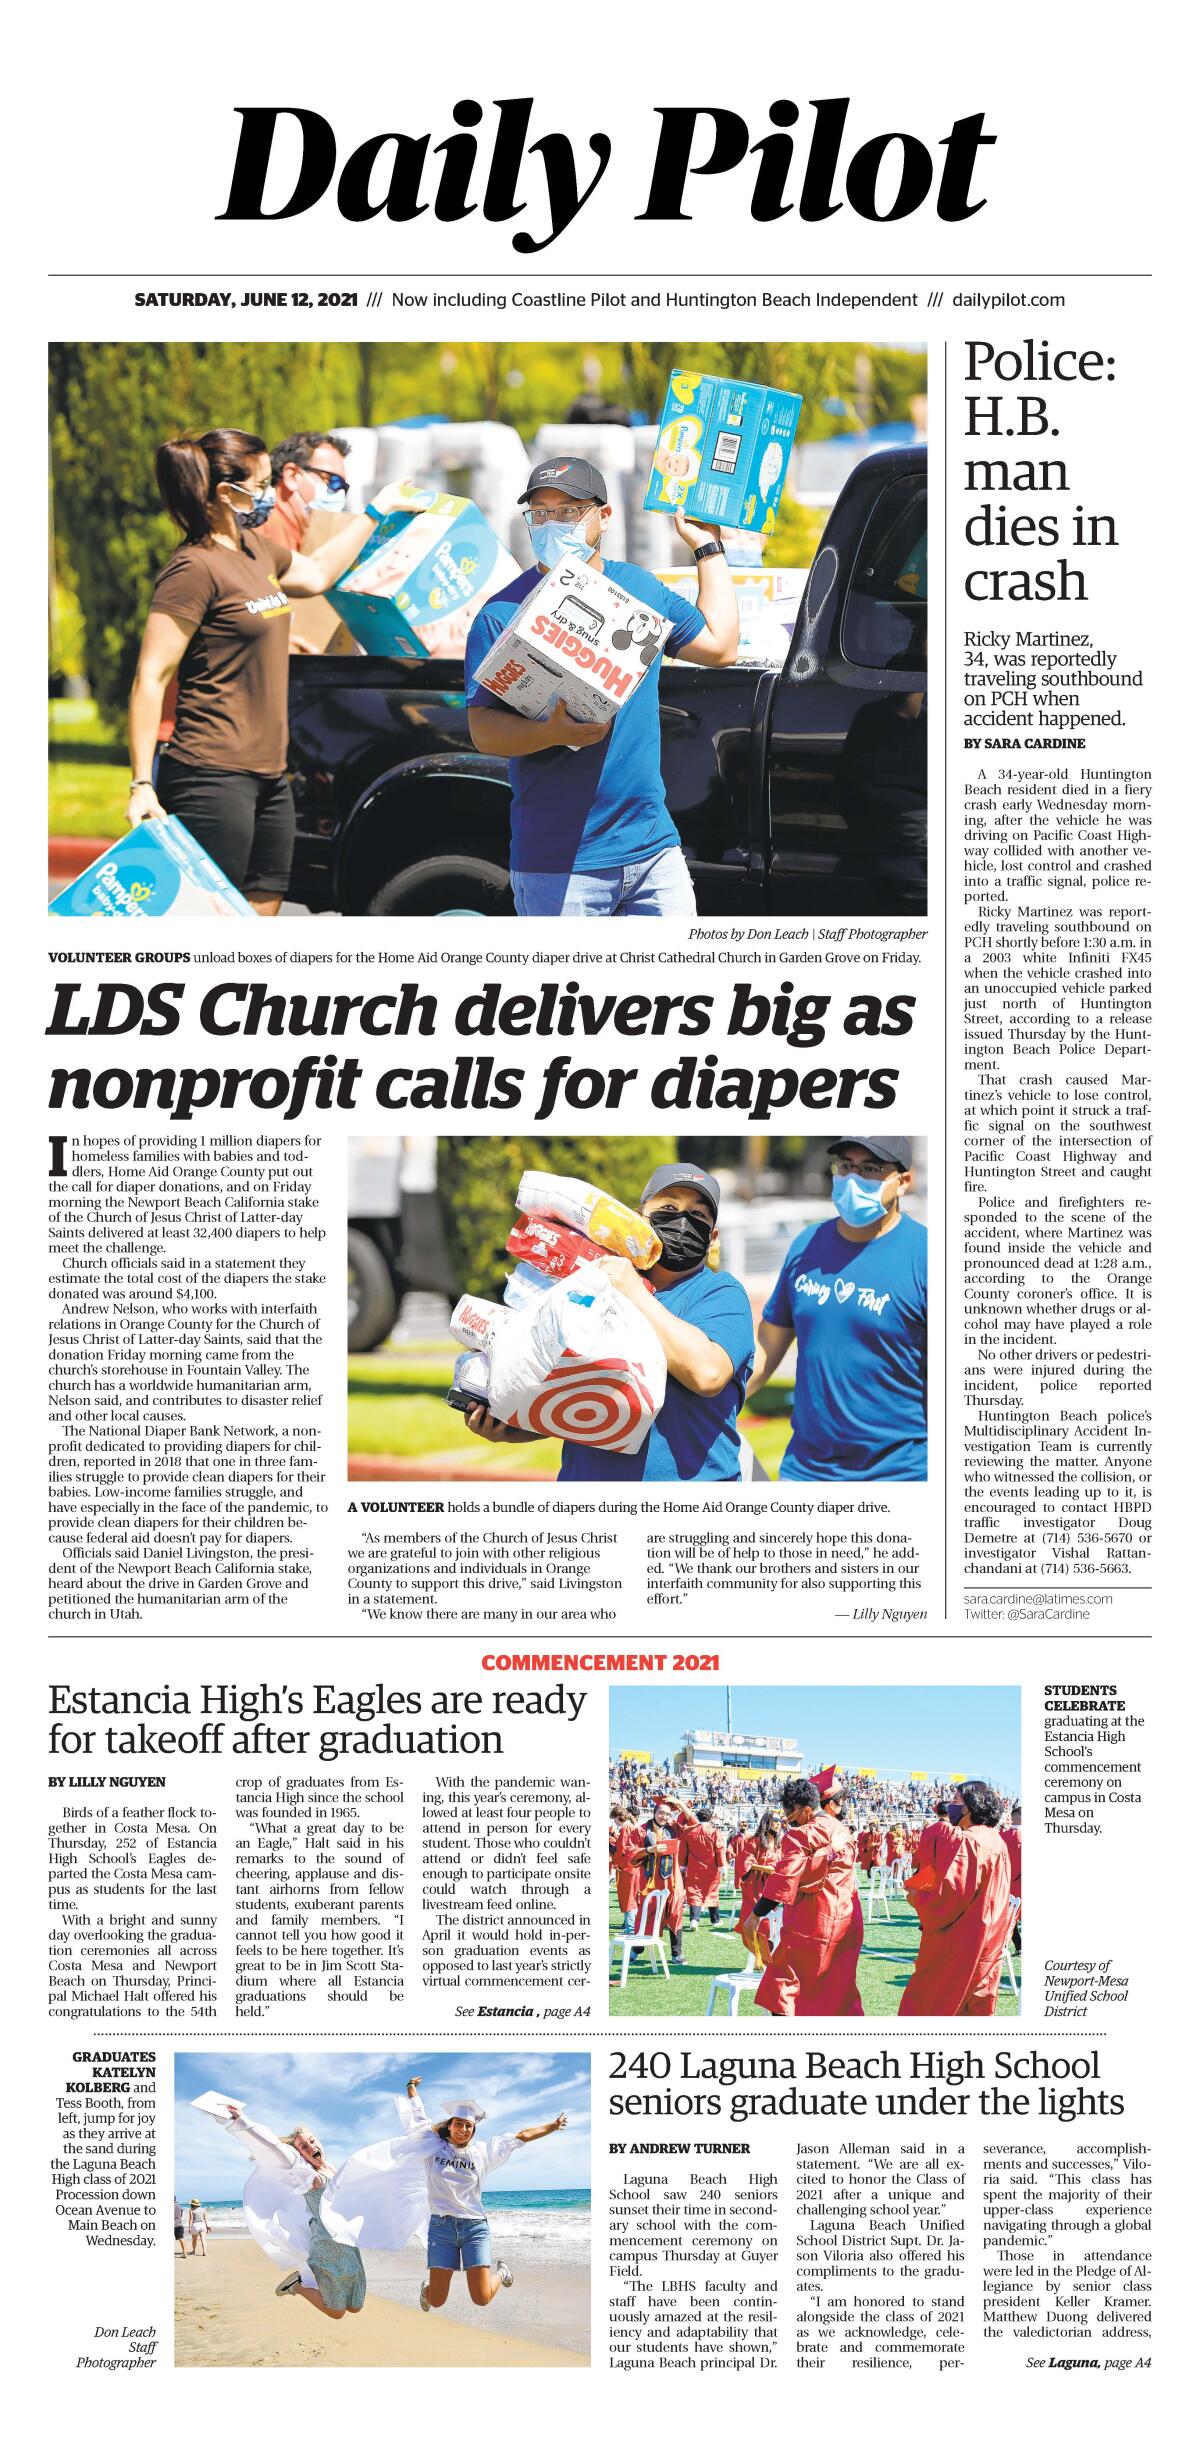 Front page of Daily Pilot e-newspaper for Saturday. June 13, 2021.